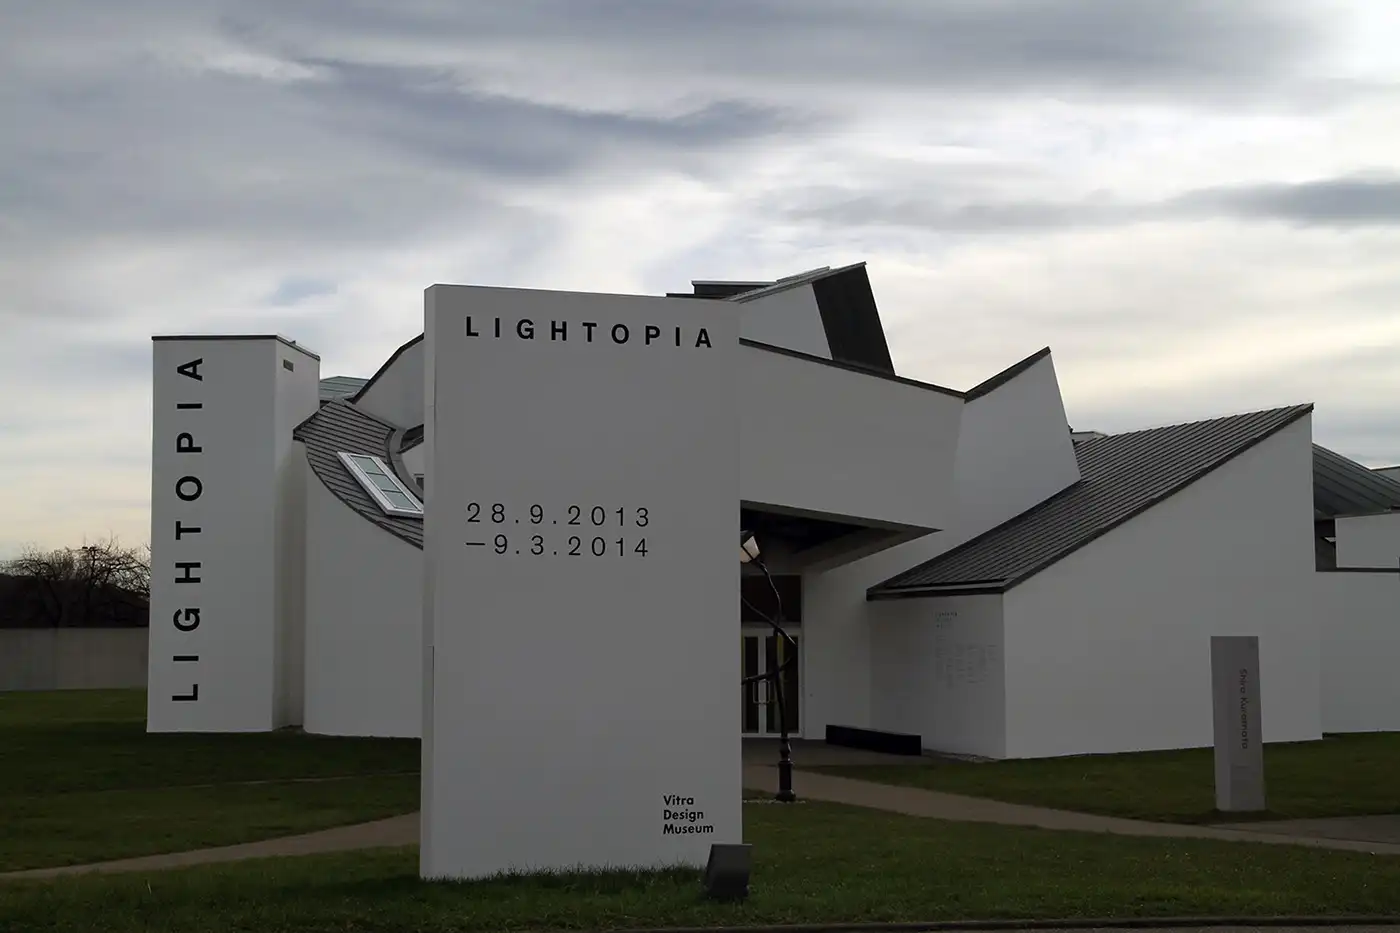 Enlighten Yourself at the Vitra Design Museum